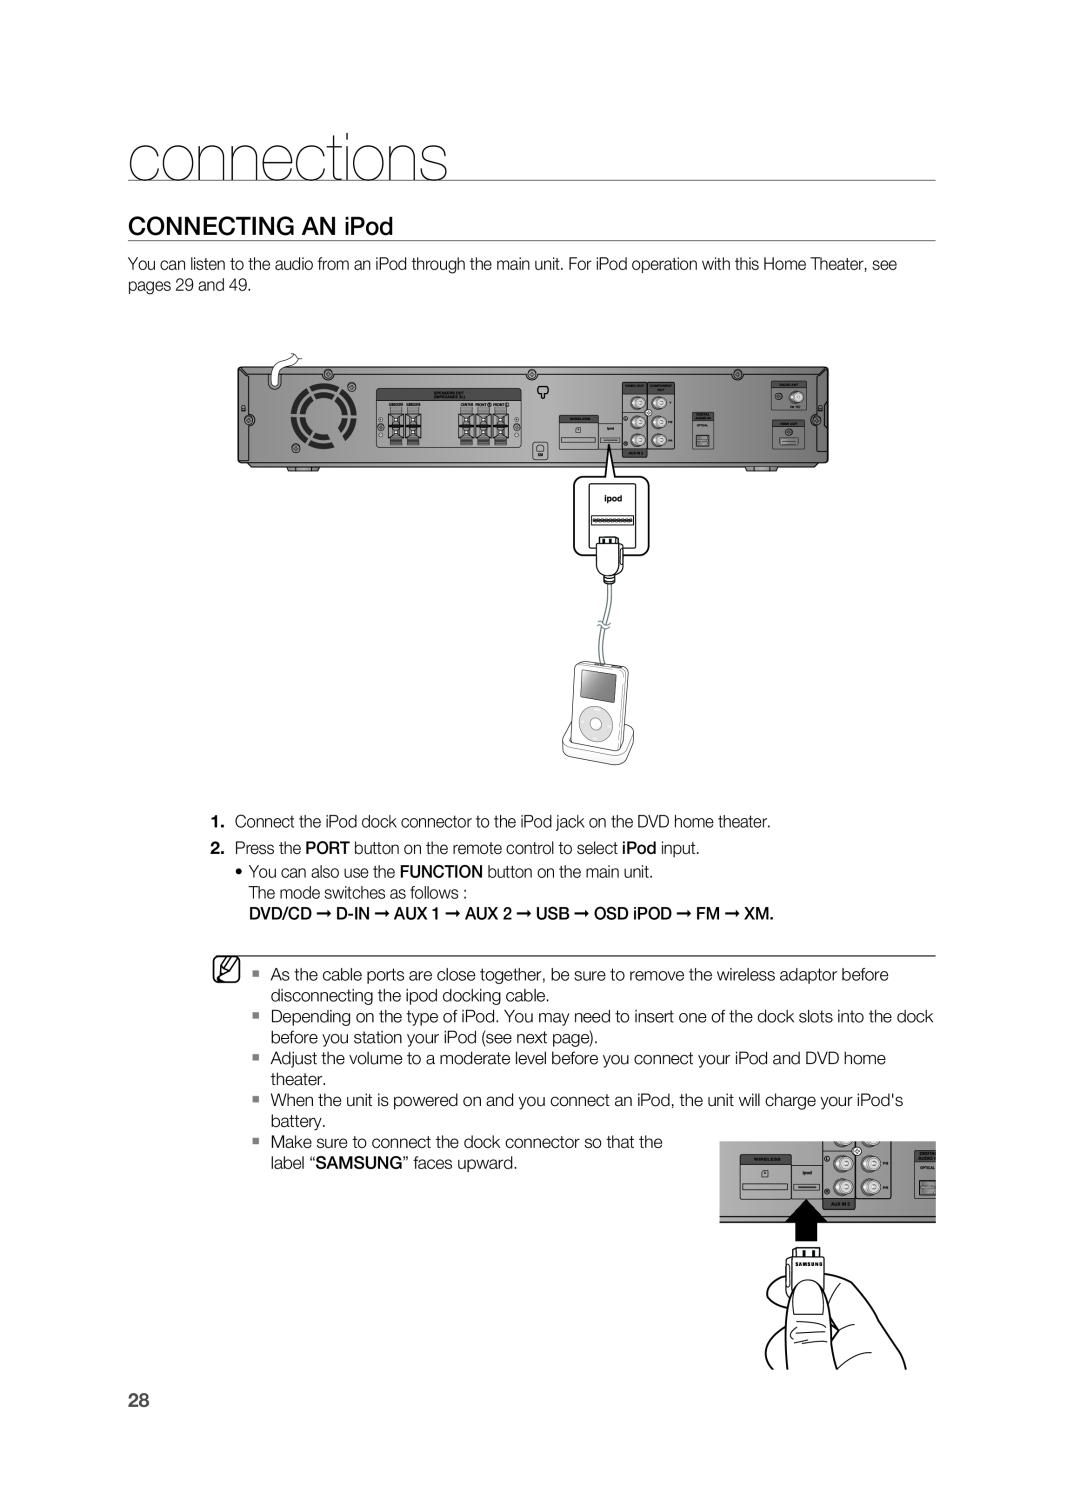 Samsung HT-TZ515 user manual Connecting an iPod, connections 